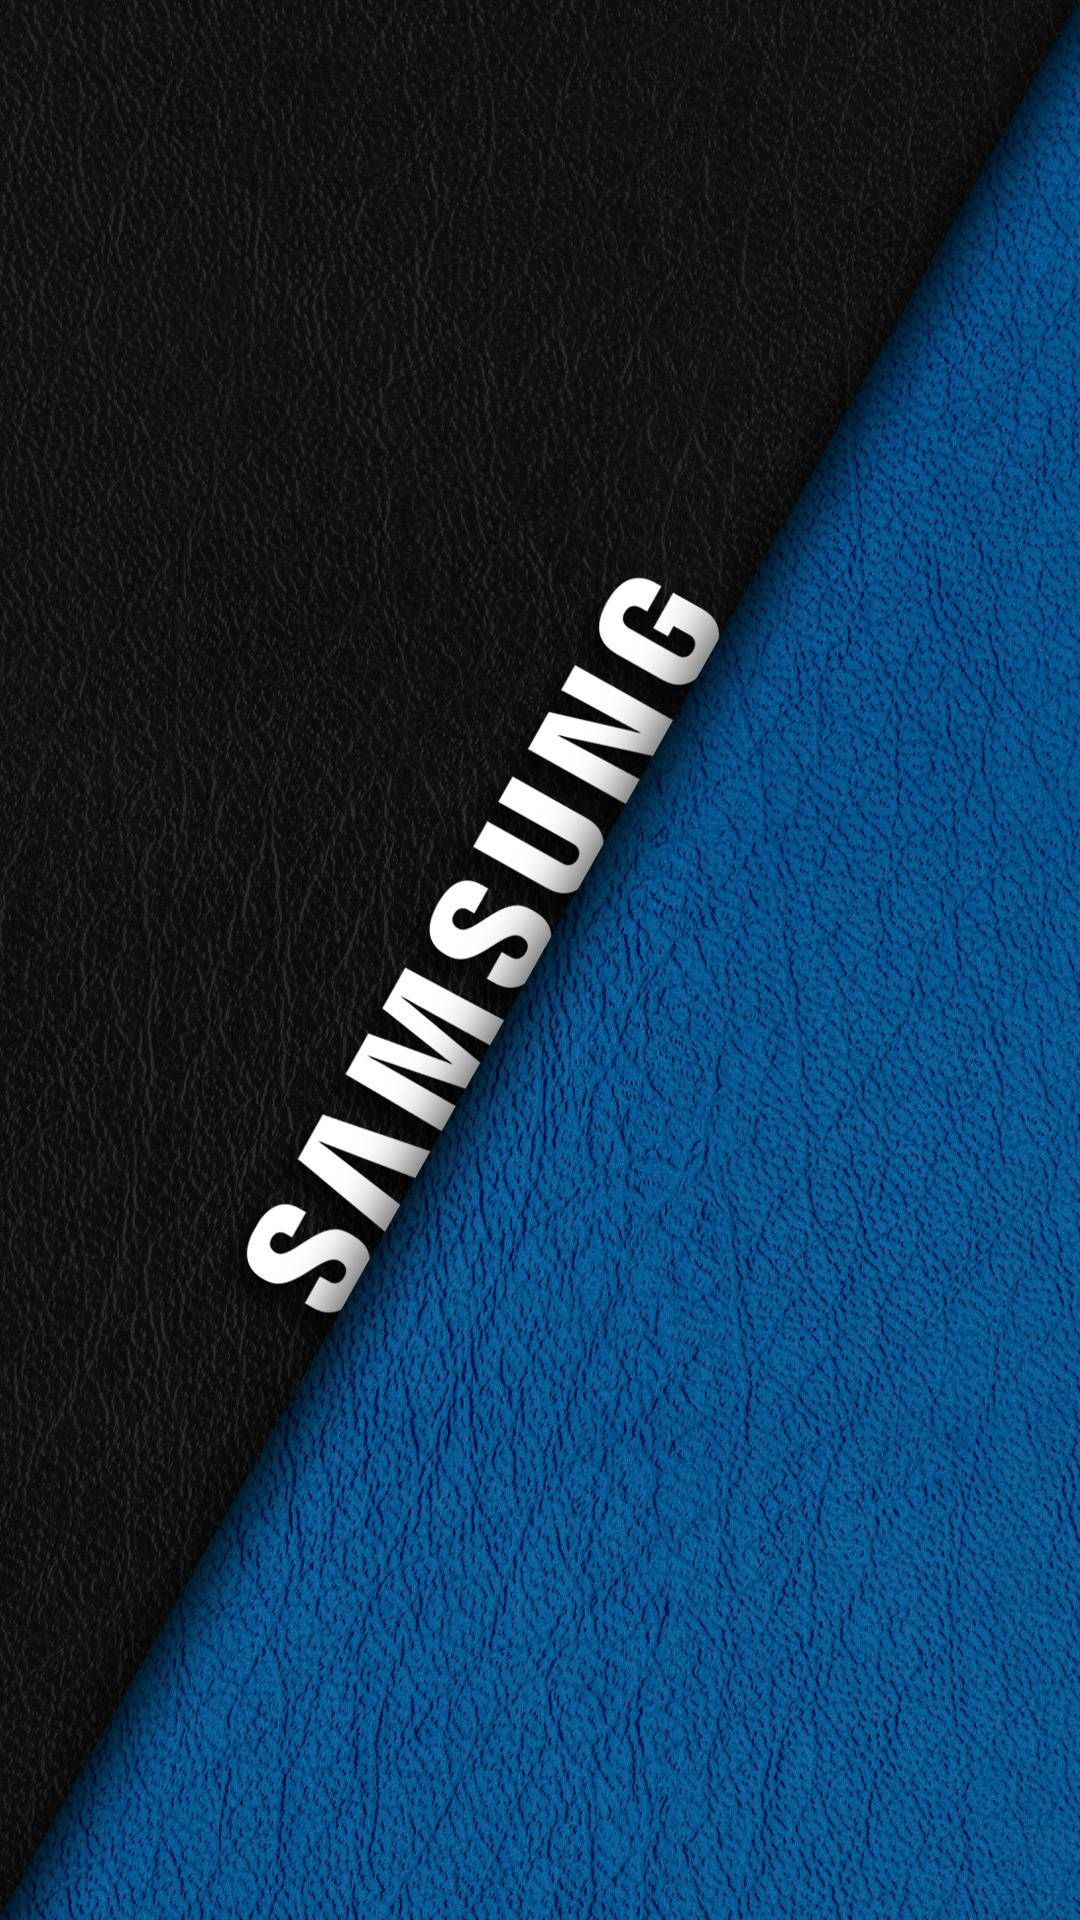 1080x1920 Samsung Logo Phone Wallpapers Top Free Samsung Logo Phone Backgrounds